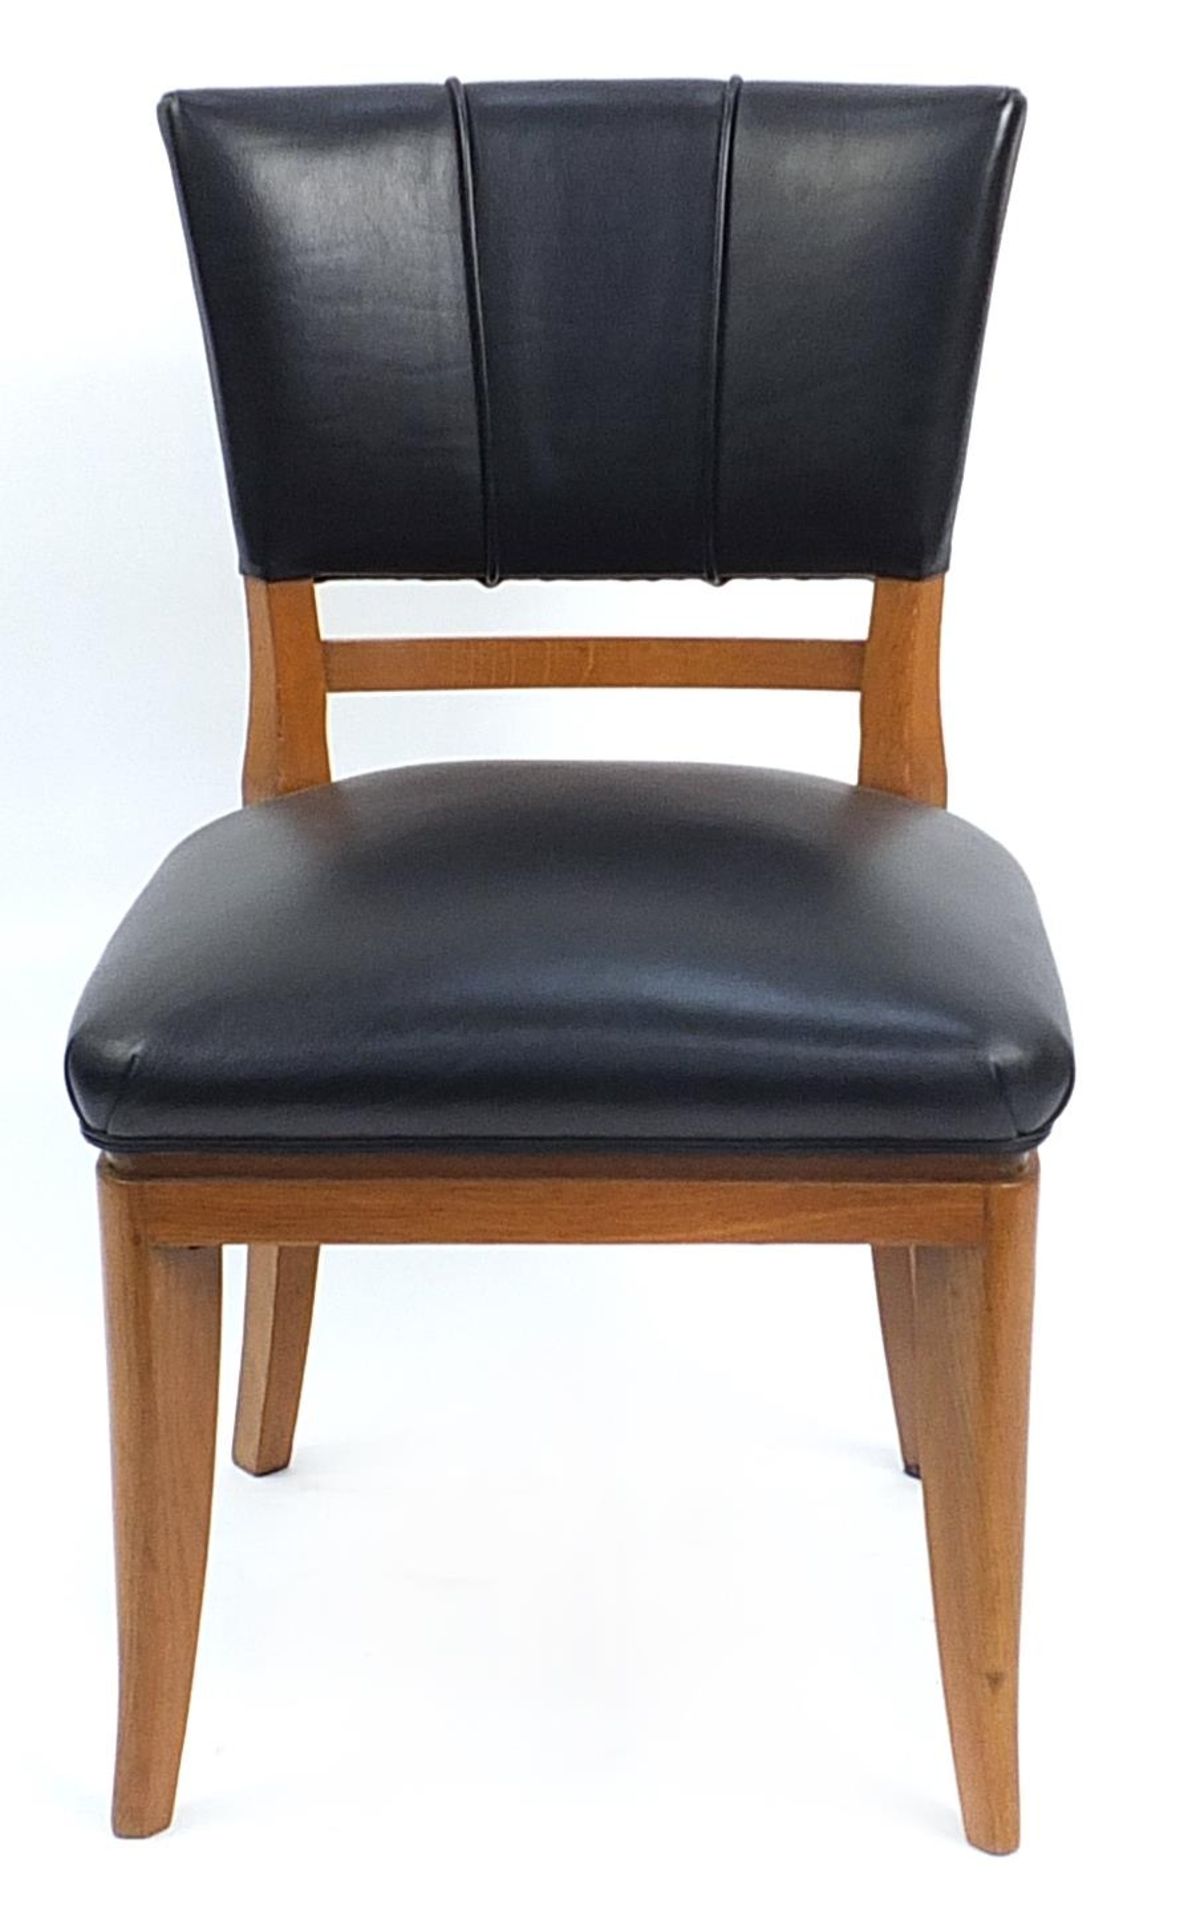 Art Deco fan design oak framed chair with black leather upholstery, 85.5cm high - Image 2 of 3